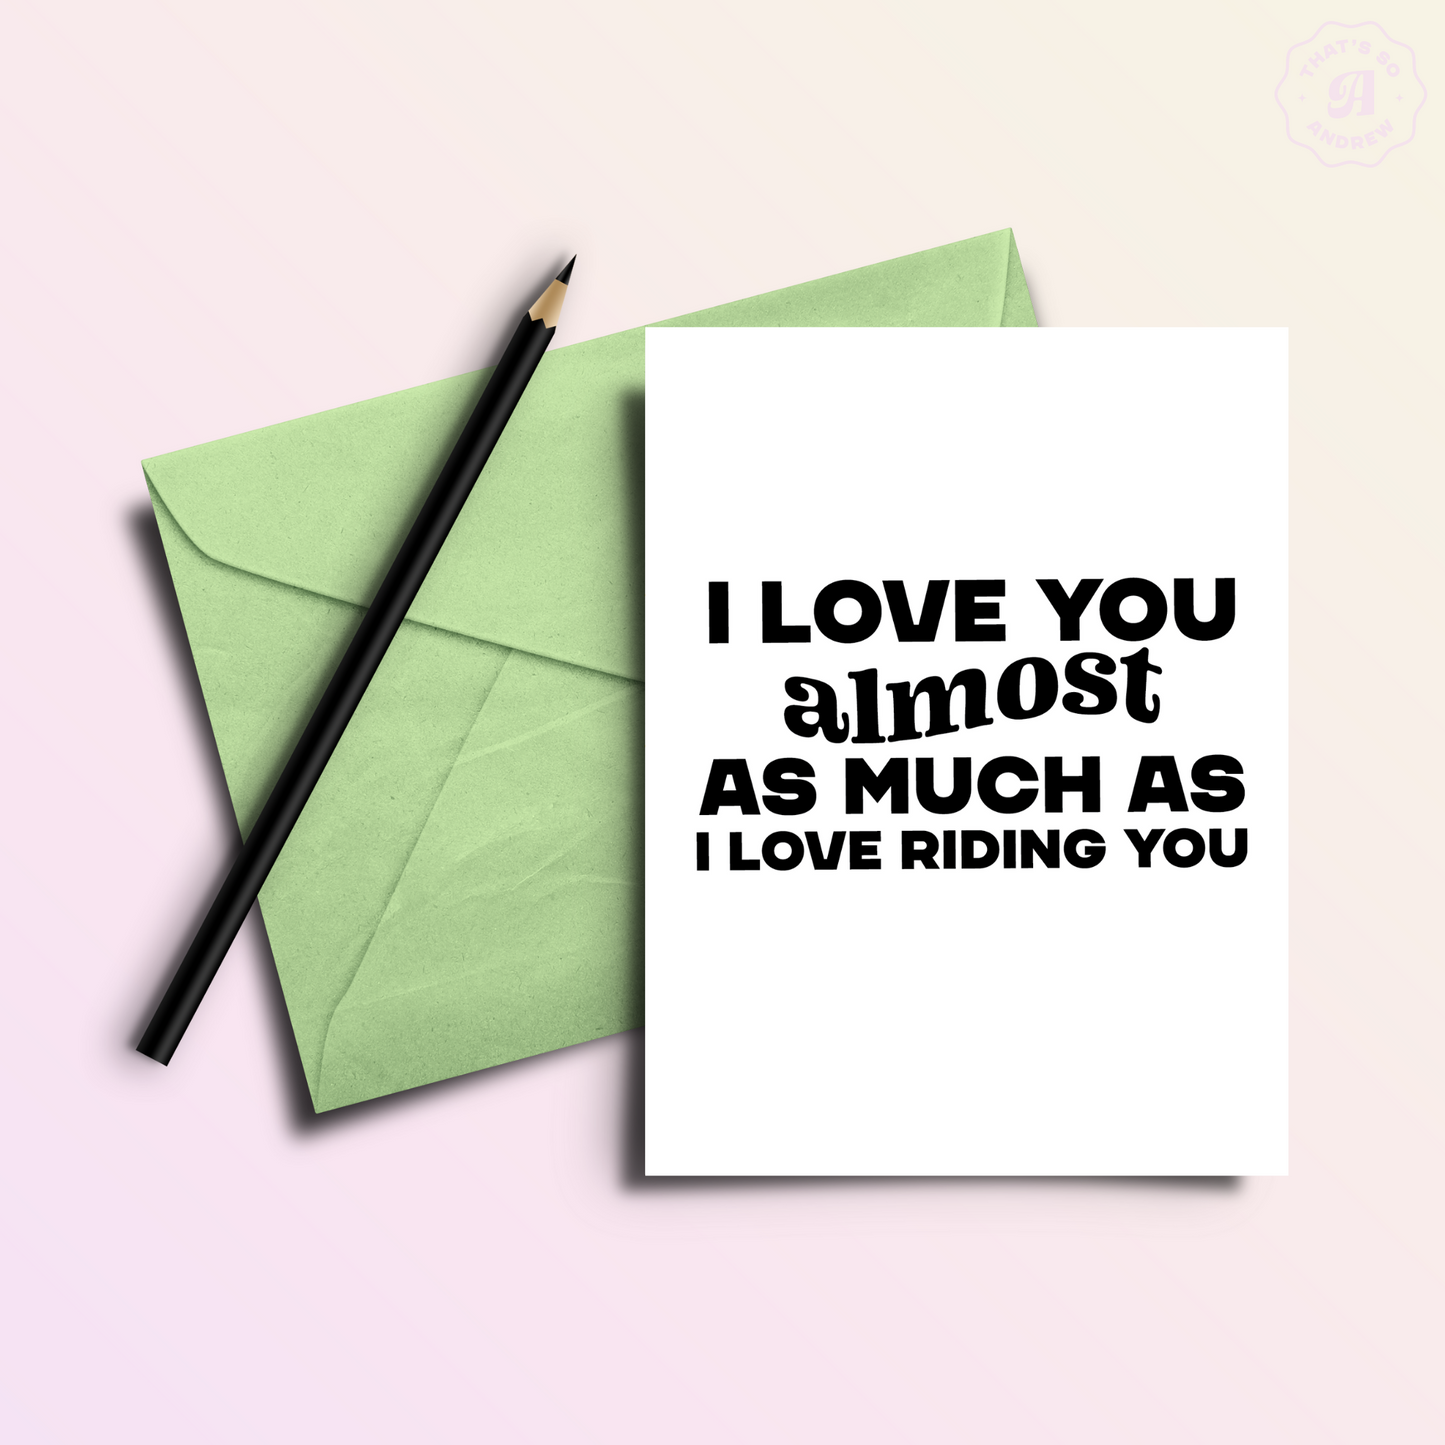 Riding You | Funny and Dirty Adult Greeting Card